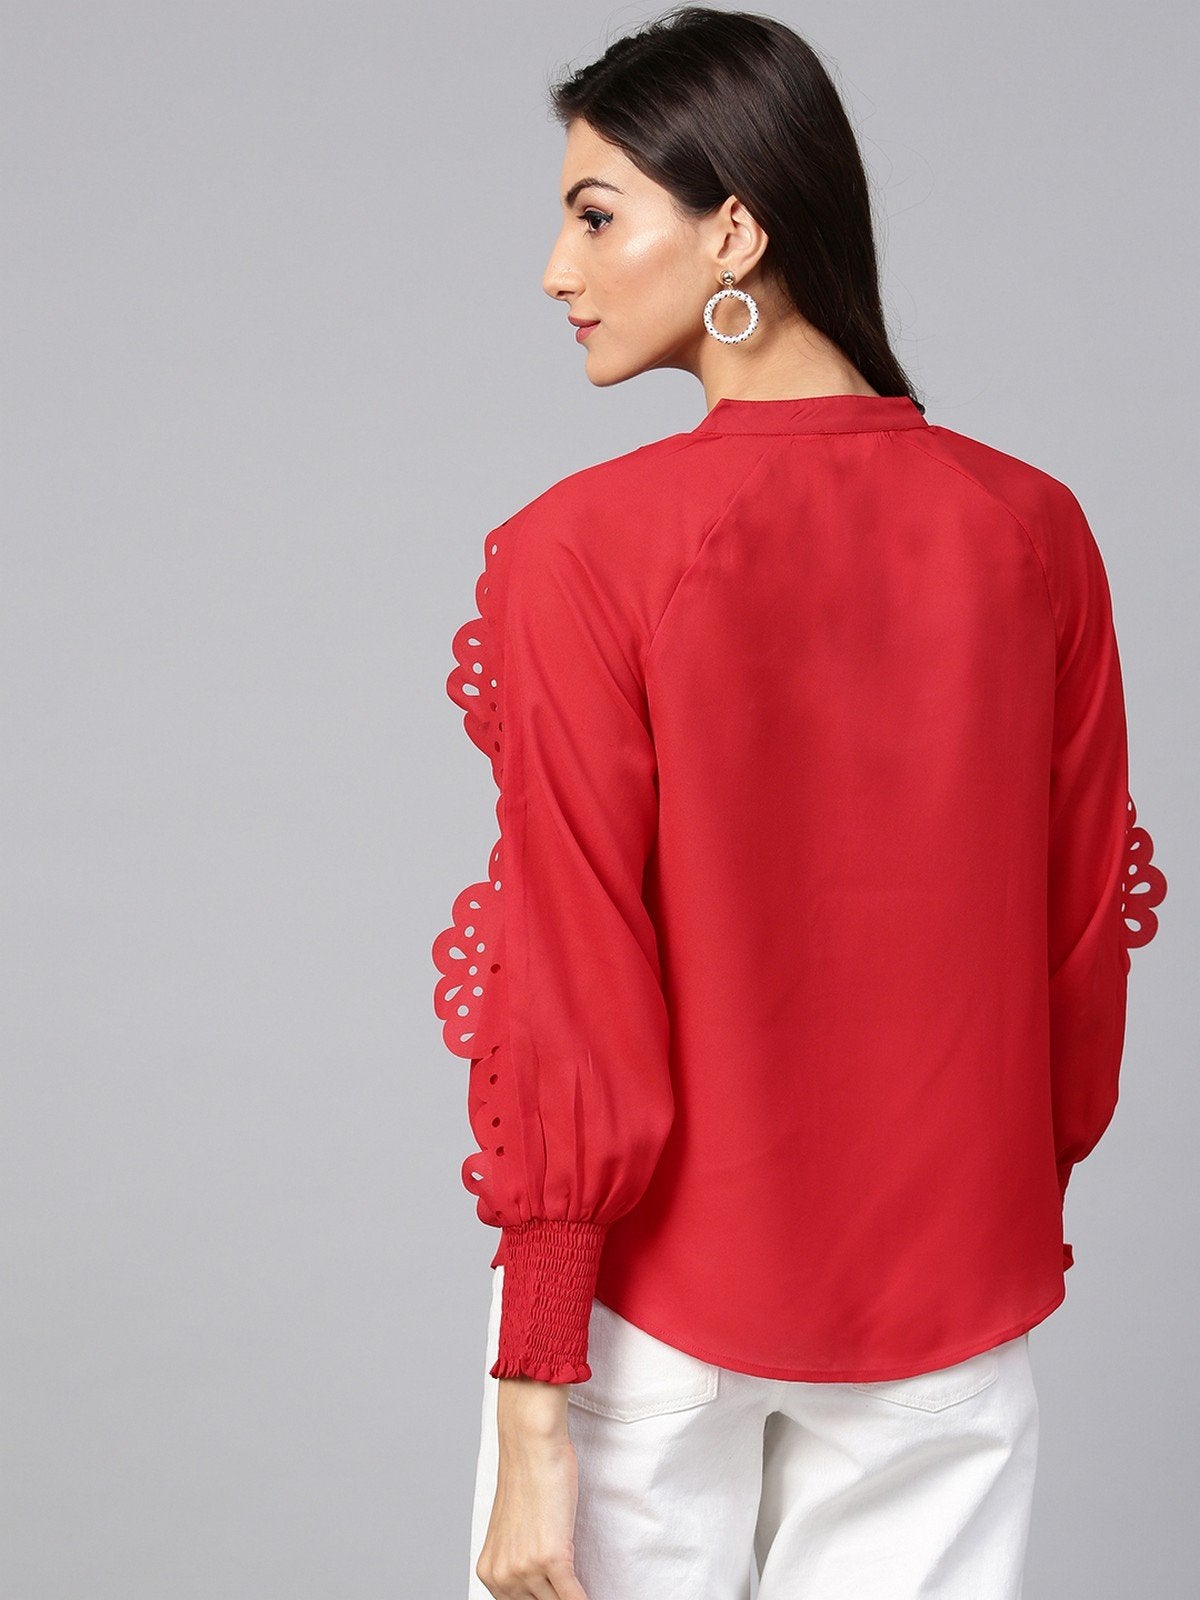 Women's Solid Top With Laser Cut Sleeves - Pannkh